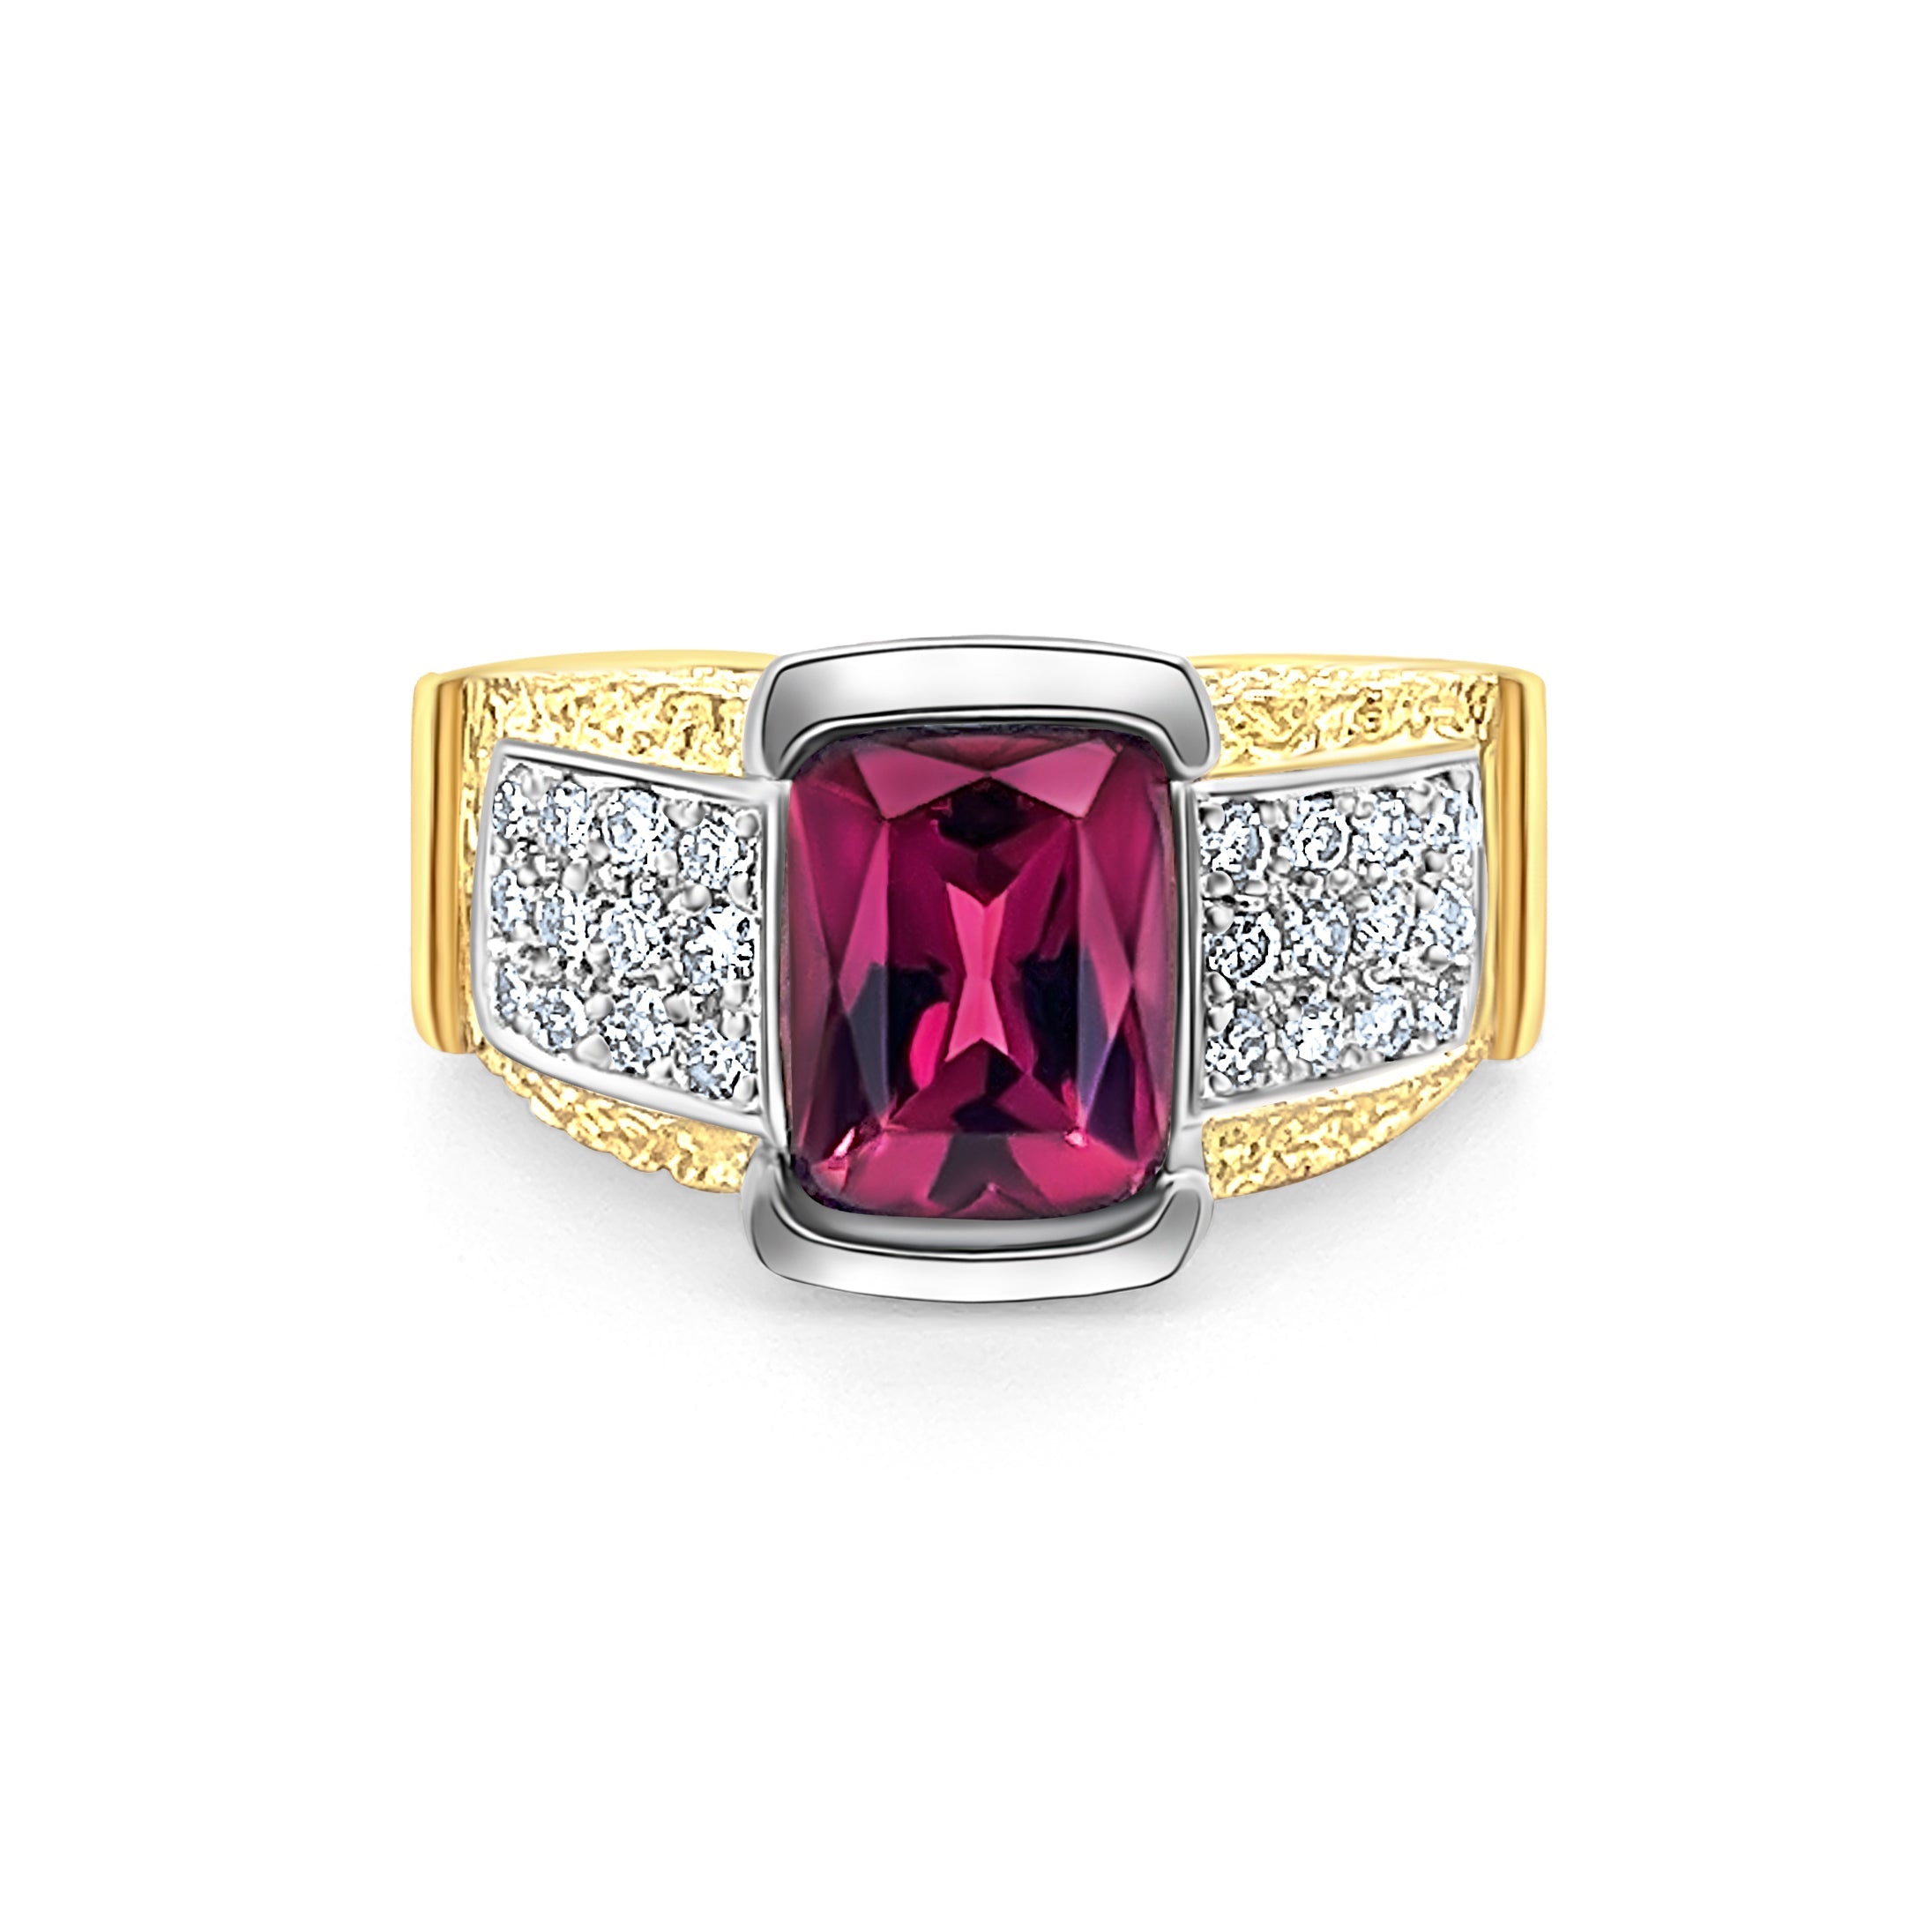 Vintage-Radiant-Cut-4_50-Carat-Red-Rubellite-Tourmaline-and-Diamond-Ring-in-Platinum-and-18K-Gold-Semi-Precious-Jewelry.jpg